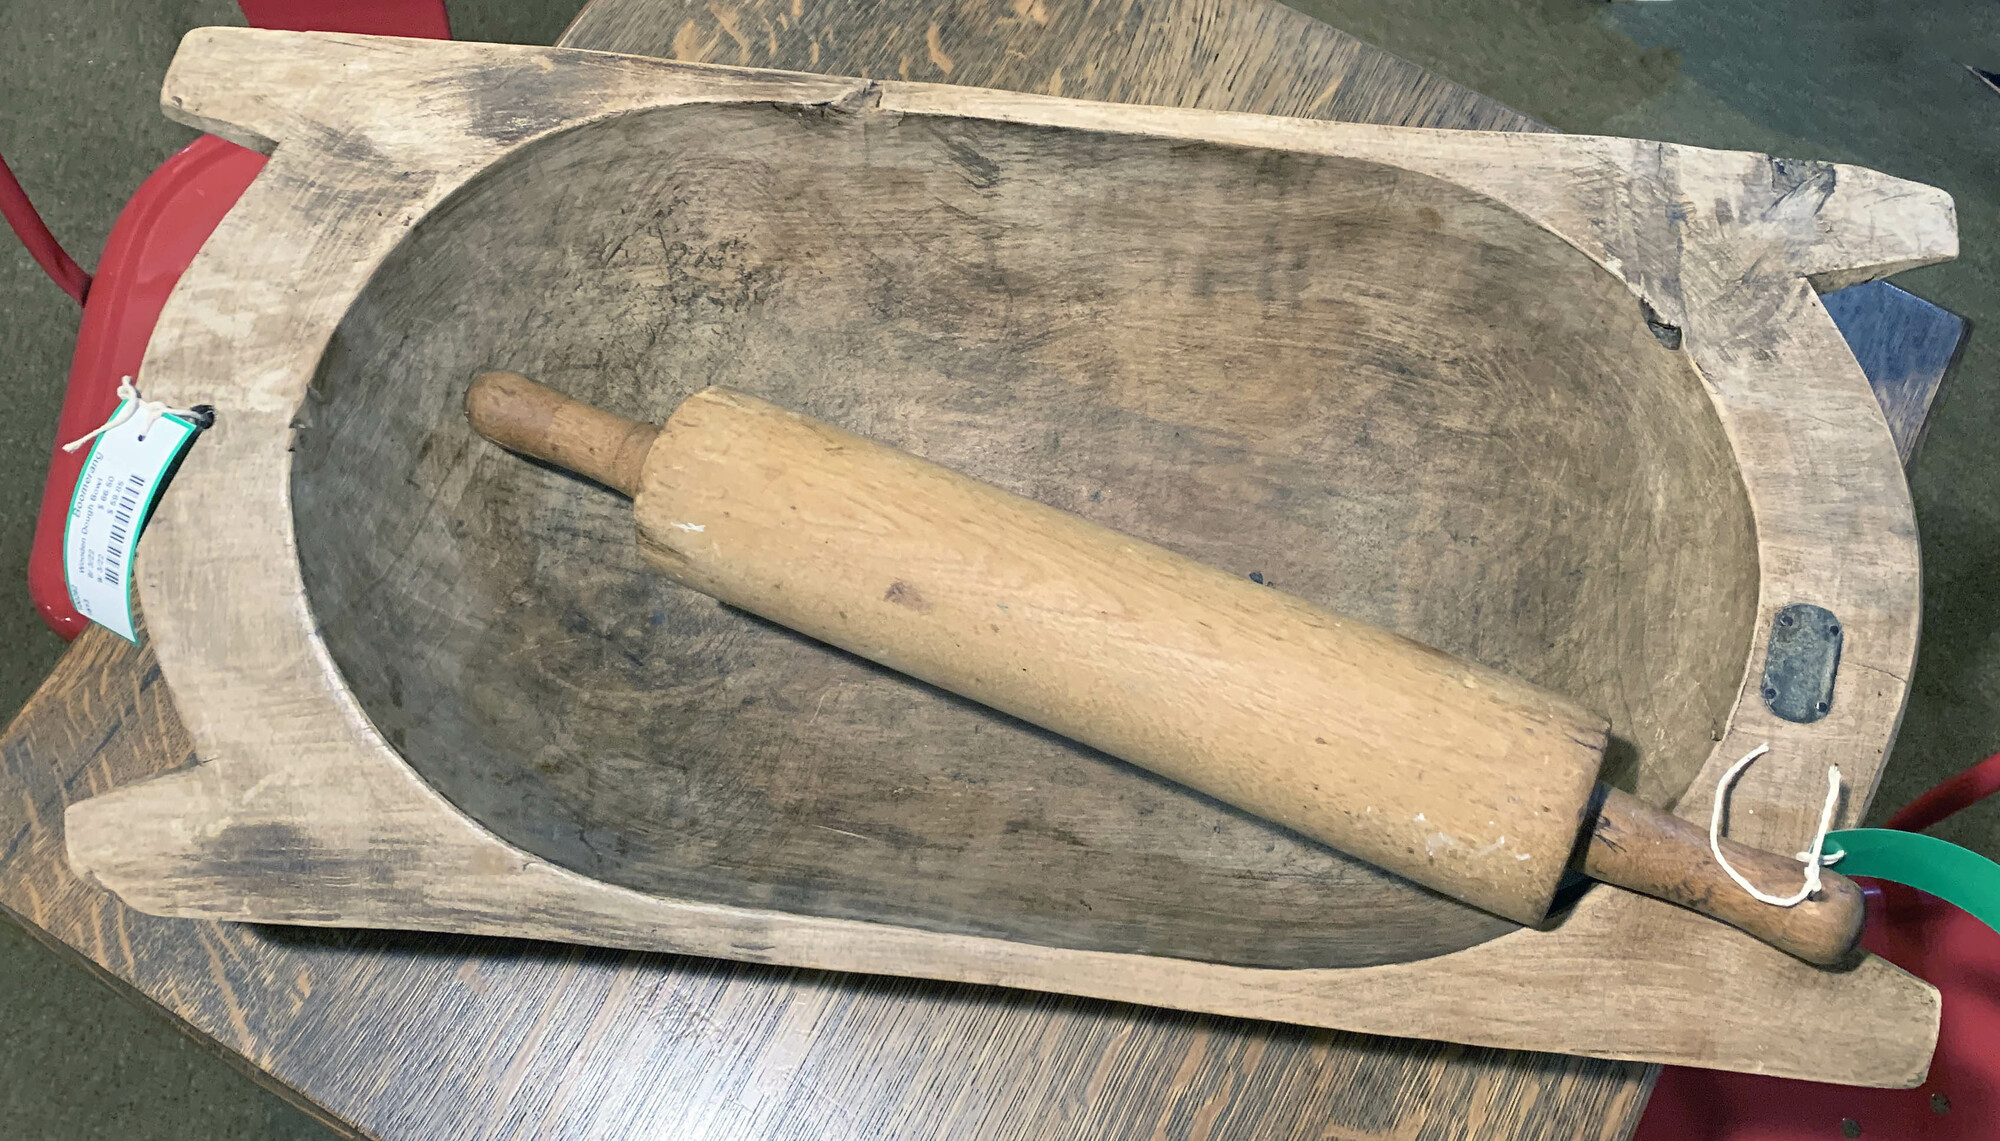 Lg Vintage Wooden Rolling Pin - $22.50